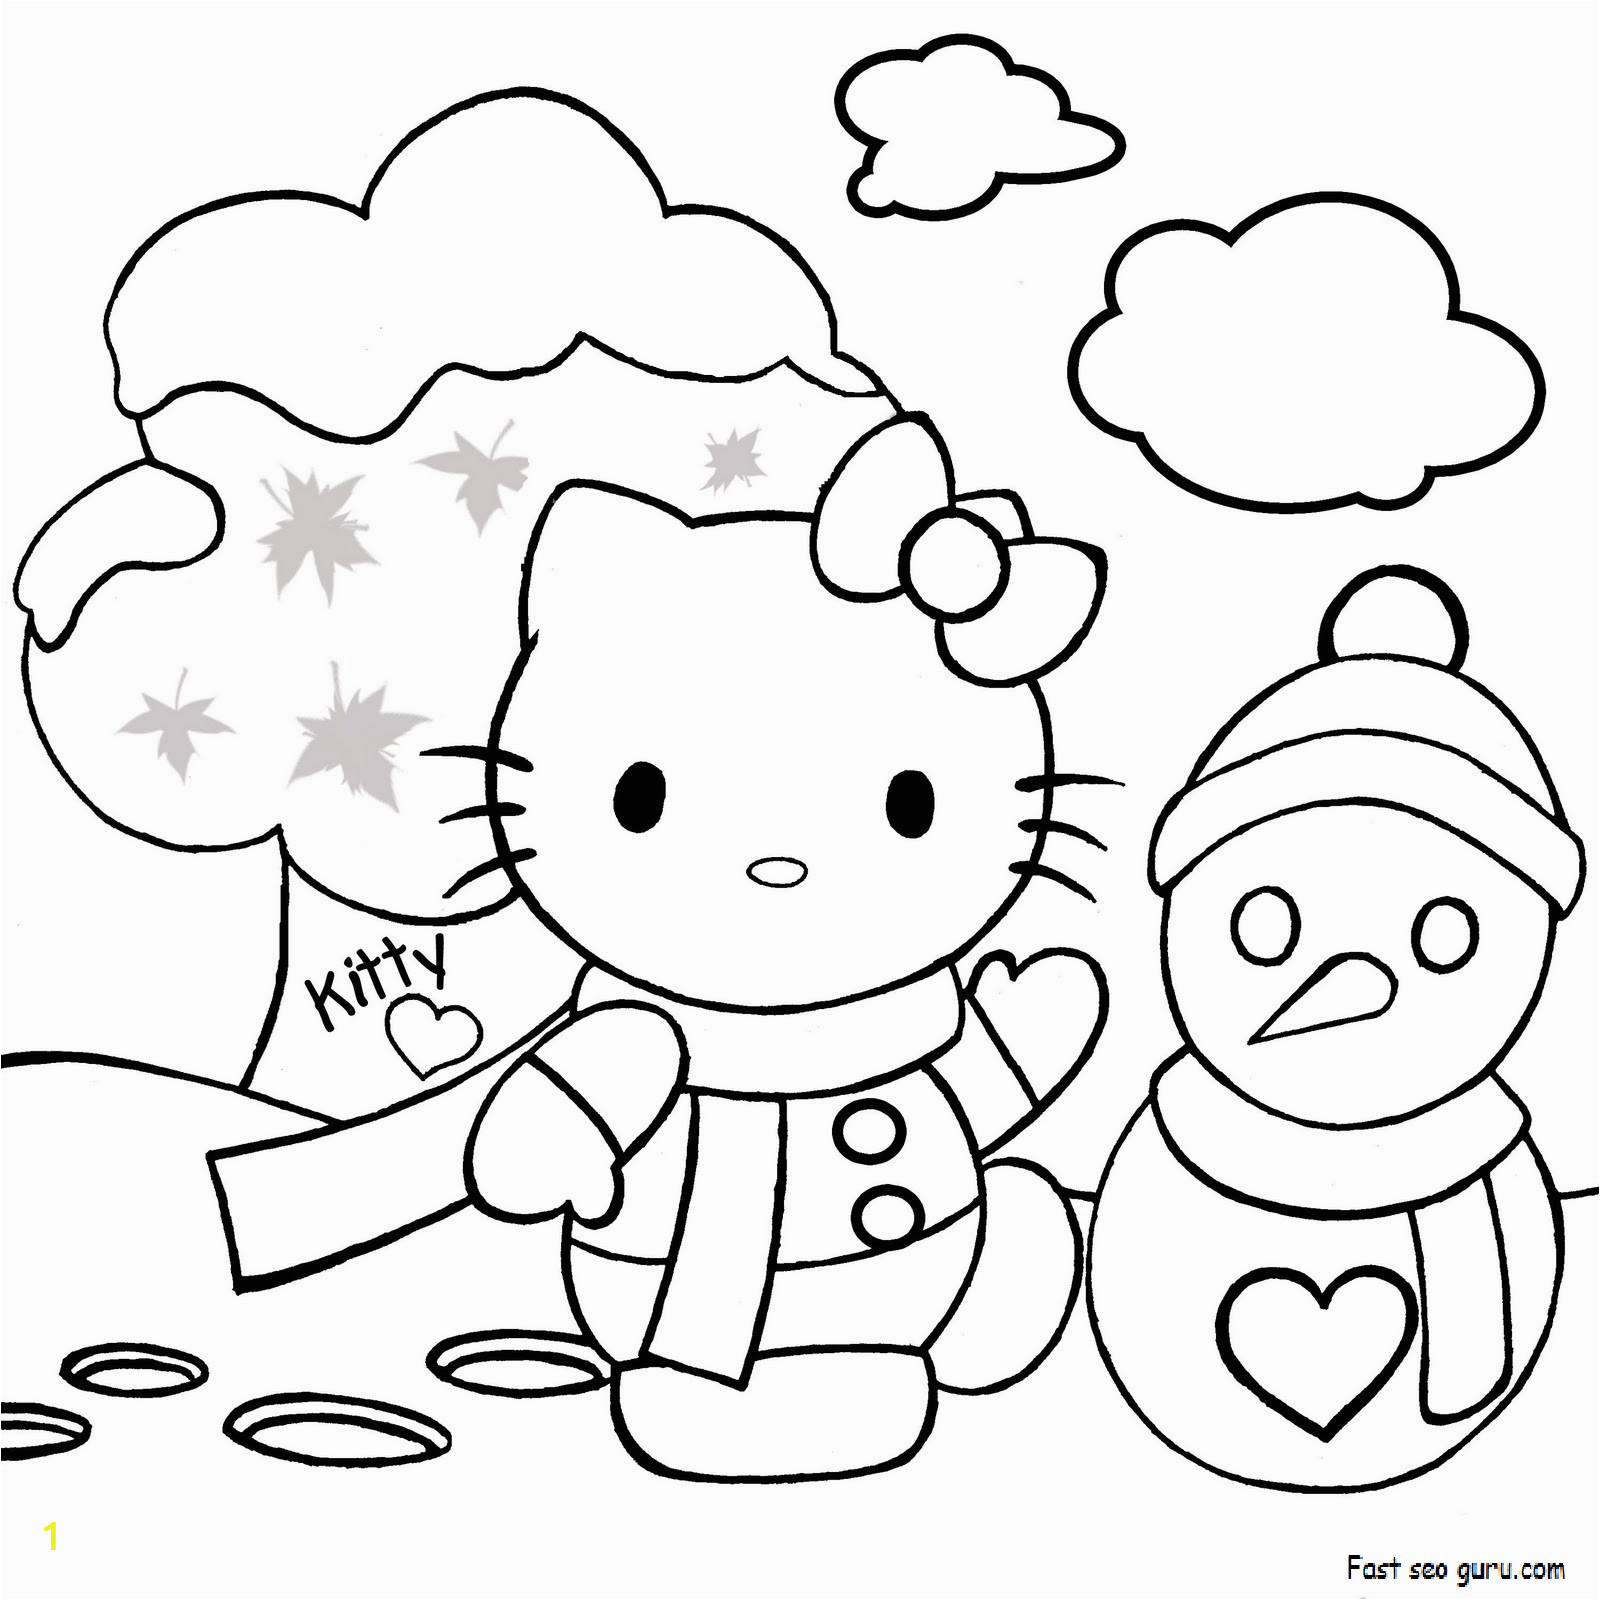 Merry Christmas Hello Kitty Coloring Pages Print Out Merry Christmas Hello Kitty Coloring Pages